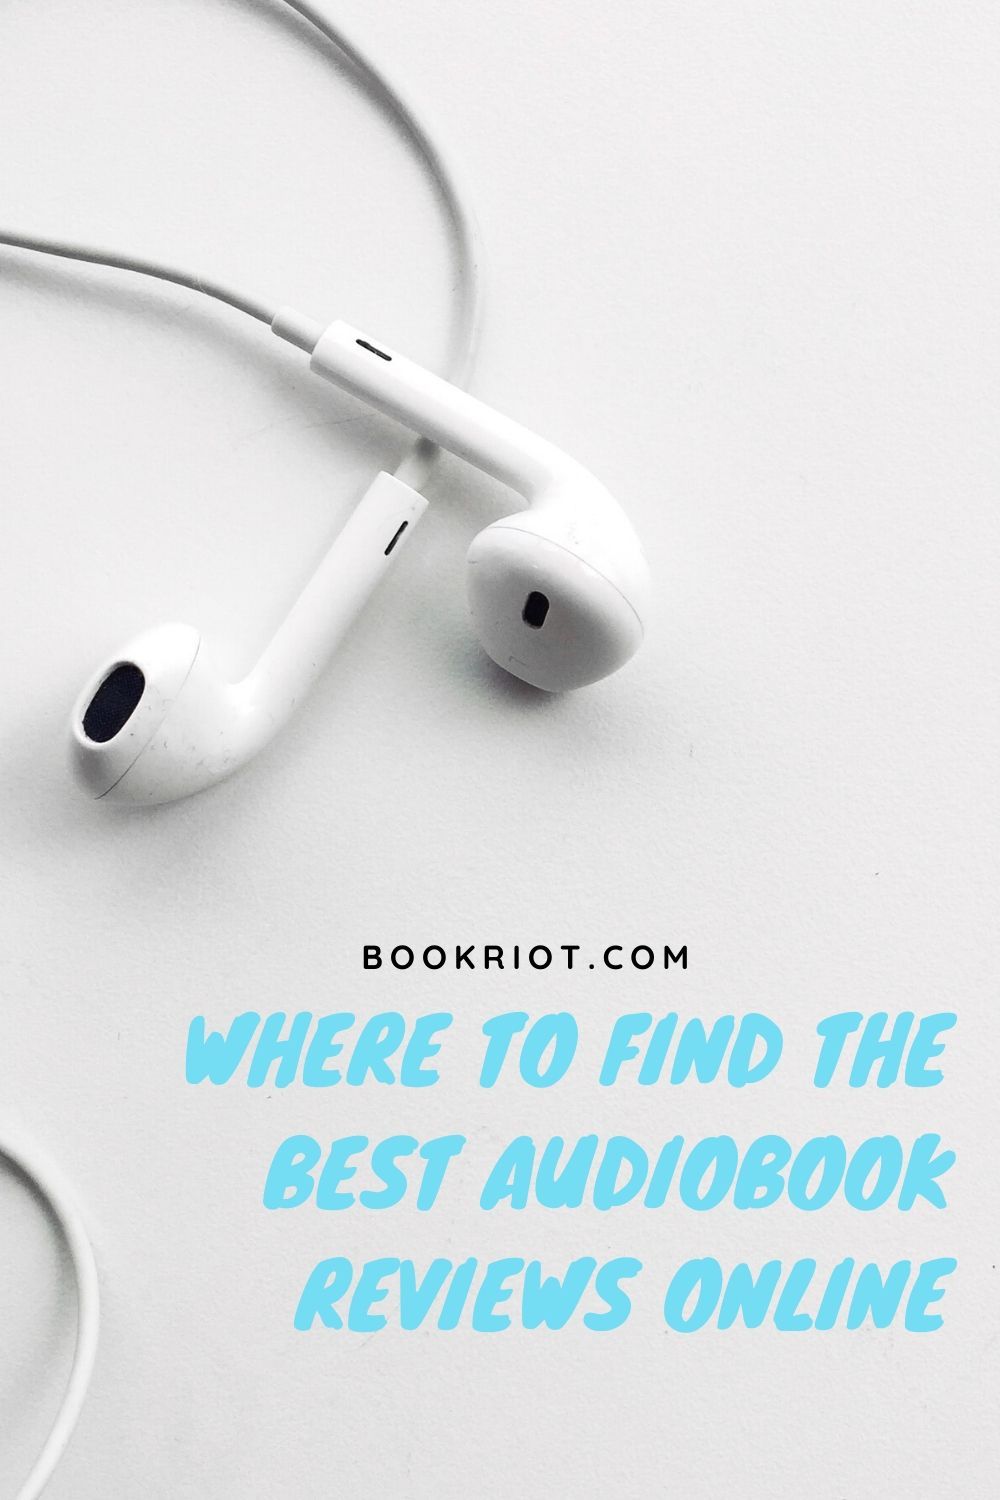 audio book review sites